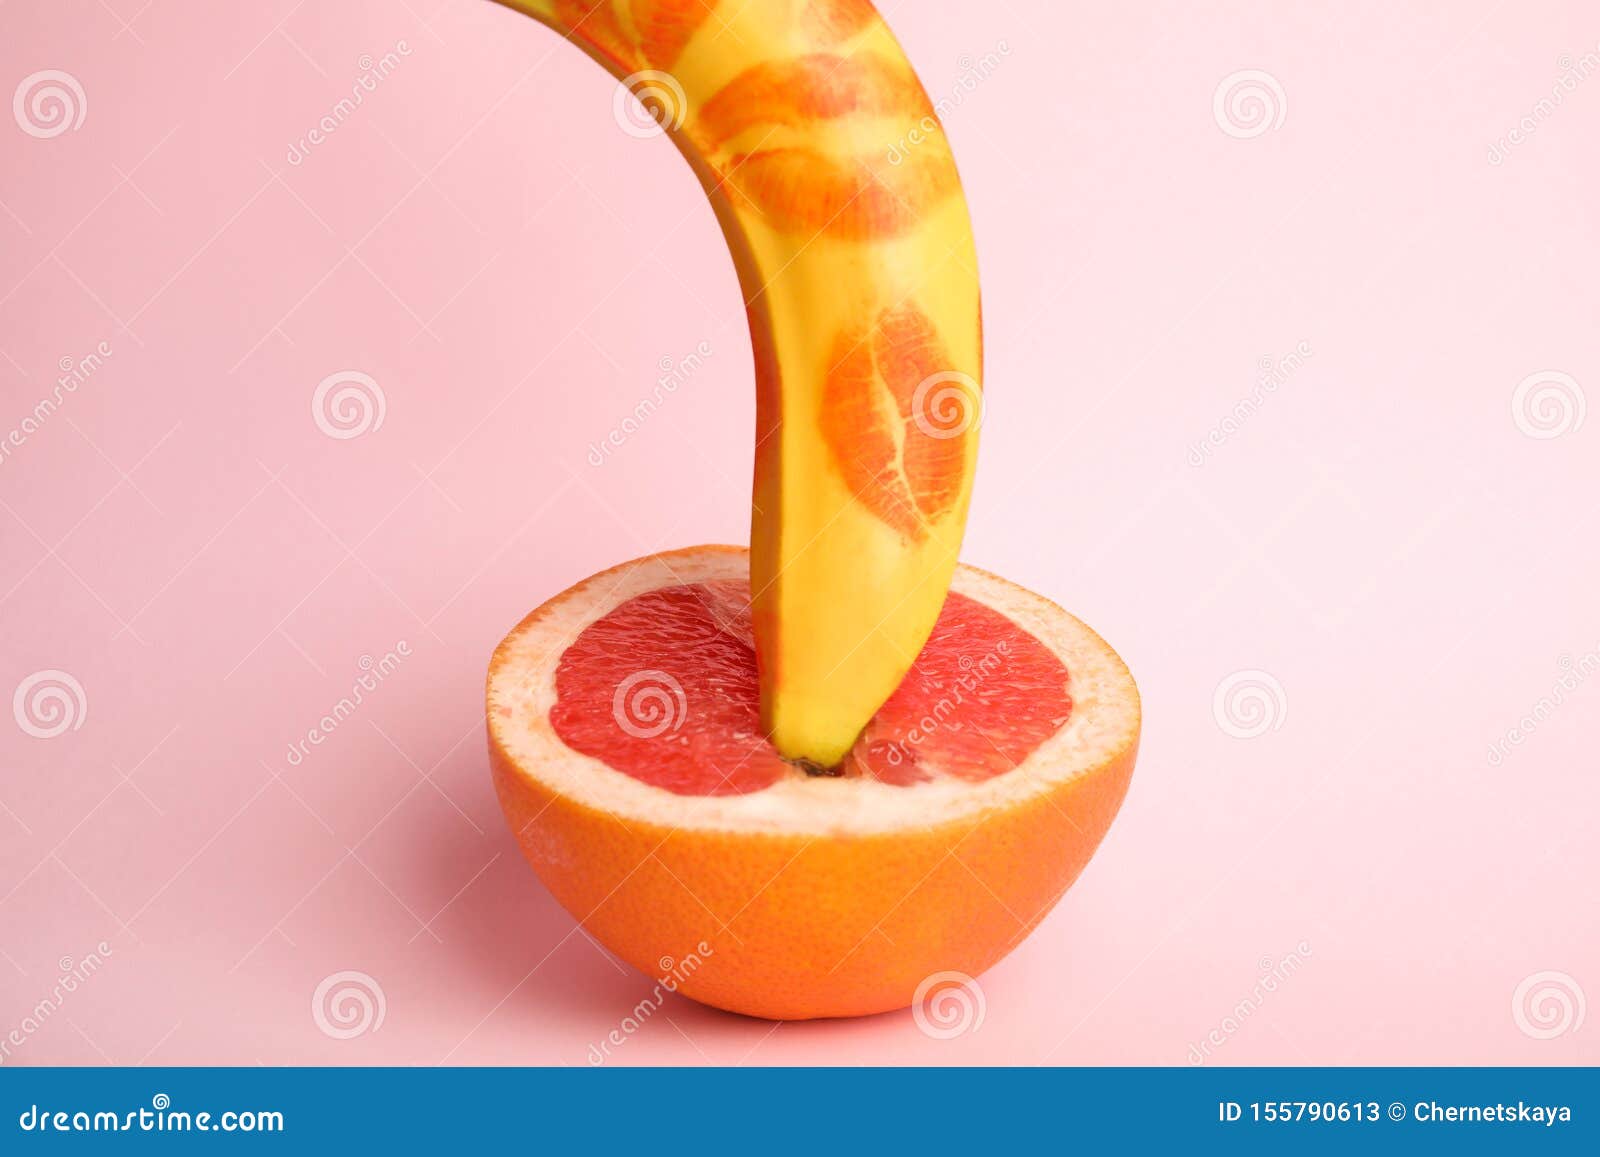 Fresh Banana With Red Lipstick Marks And On Pink Background Sex